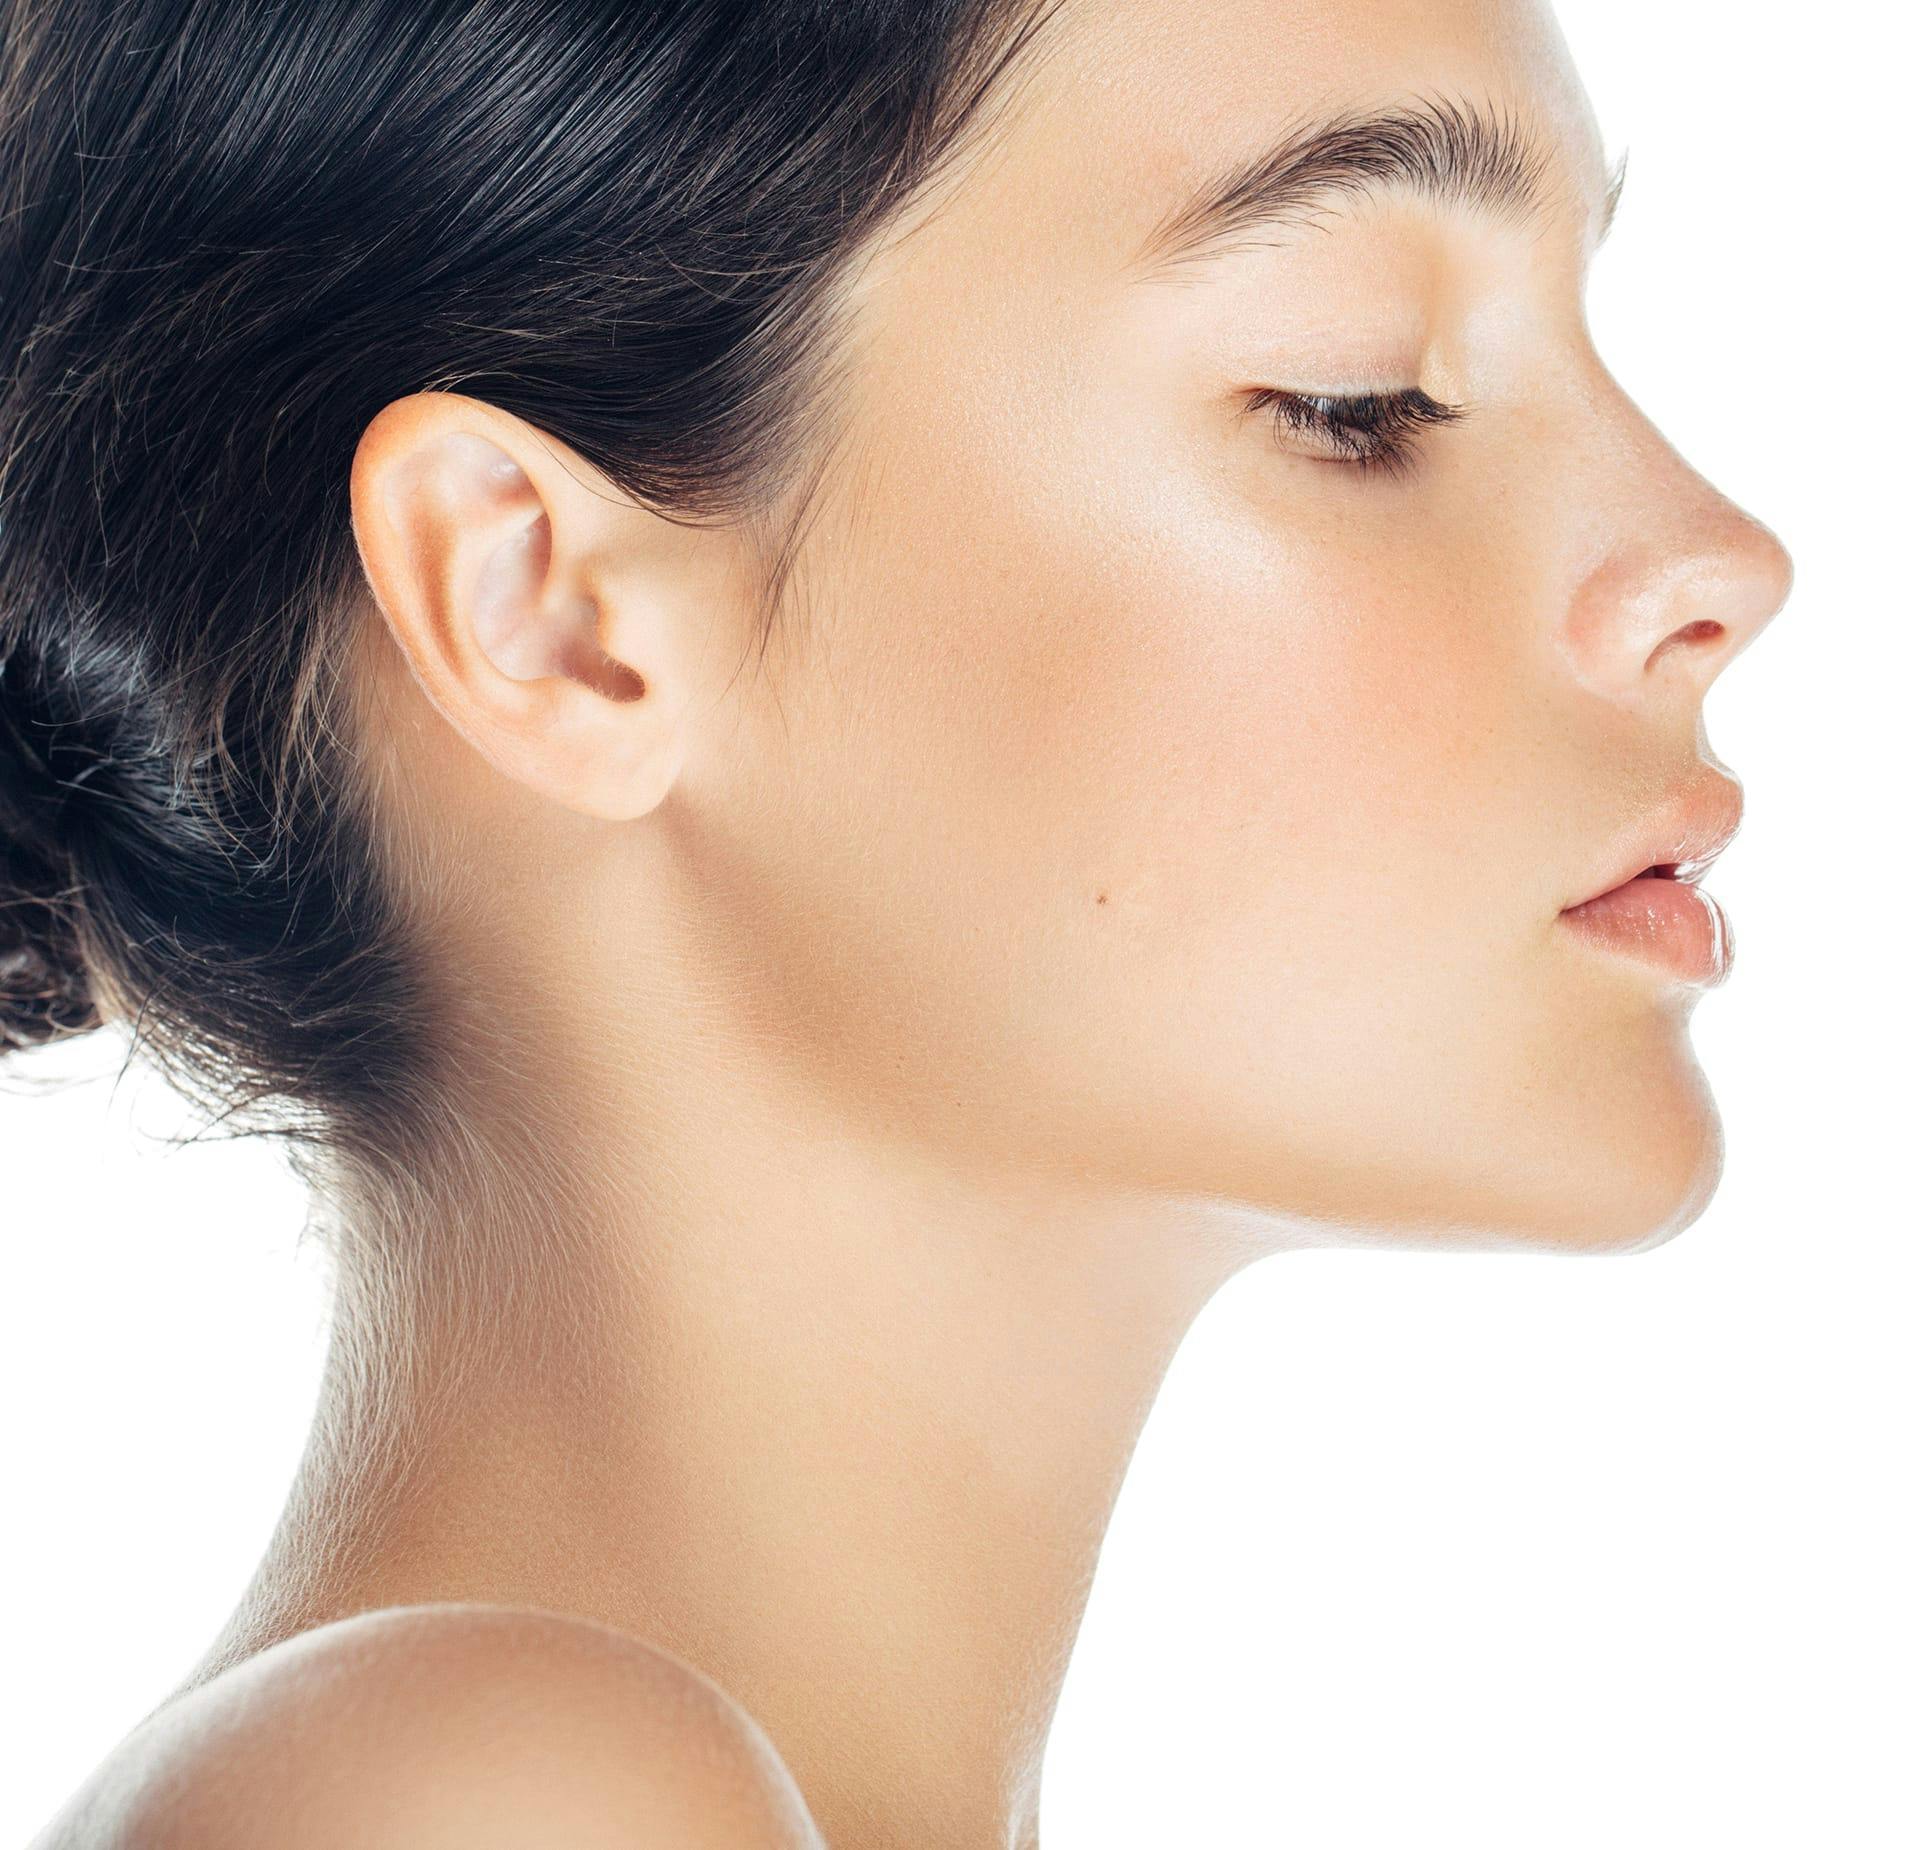 Side Profile of Woman's Face